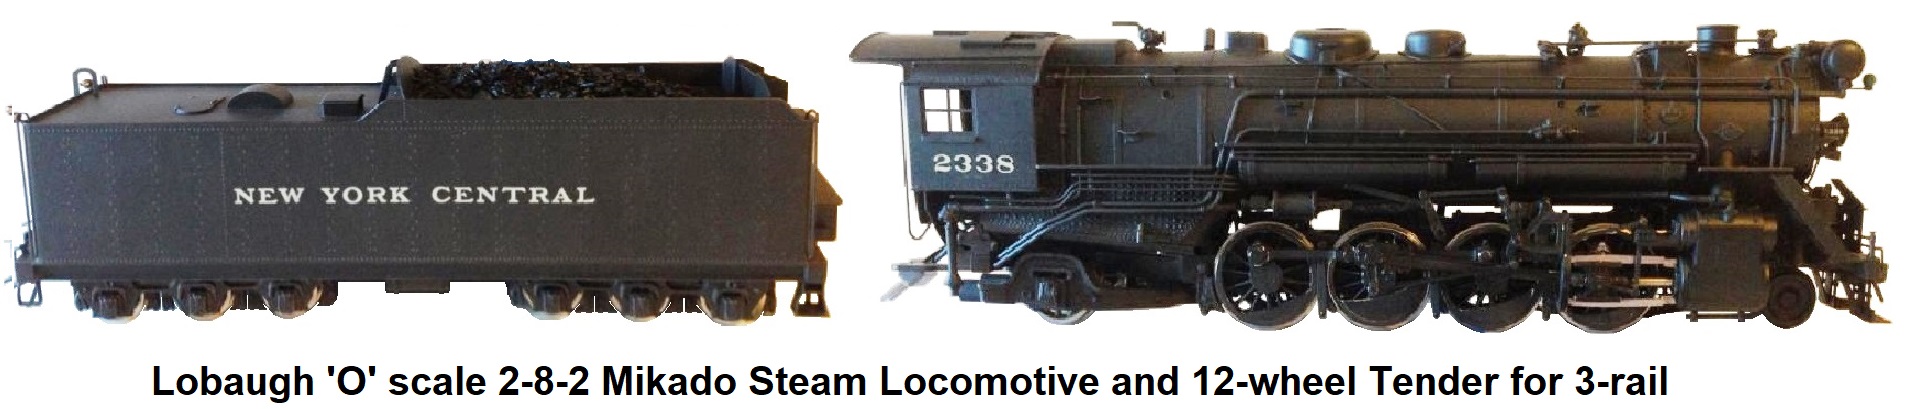 Lobaugh 'O' scale 2-8-2 New York Central Mikado loco and 12-wheel tender for 3-rail